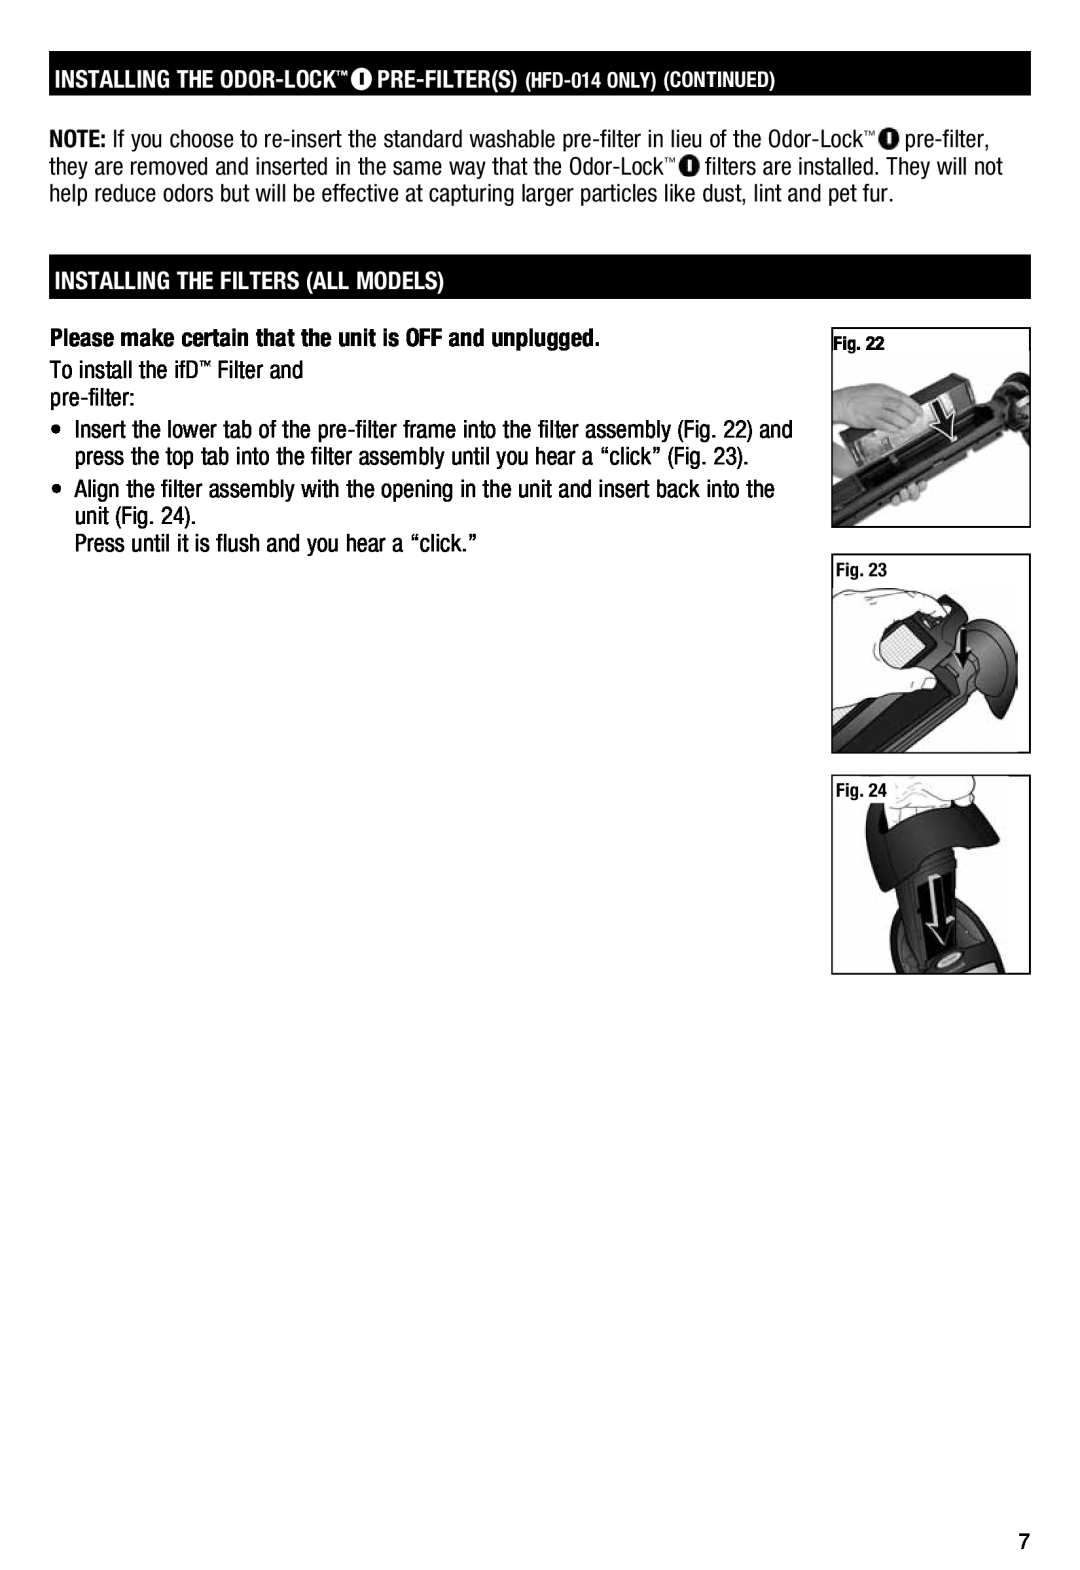 Honeywell HFD110 important safety instructions Installing The Filters All Models, To install the ifD Filter and pre-filter 